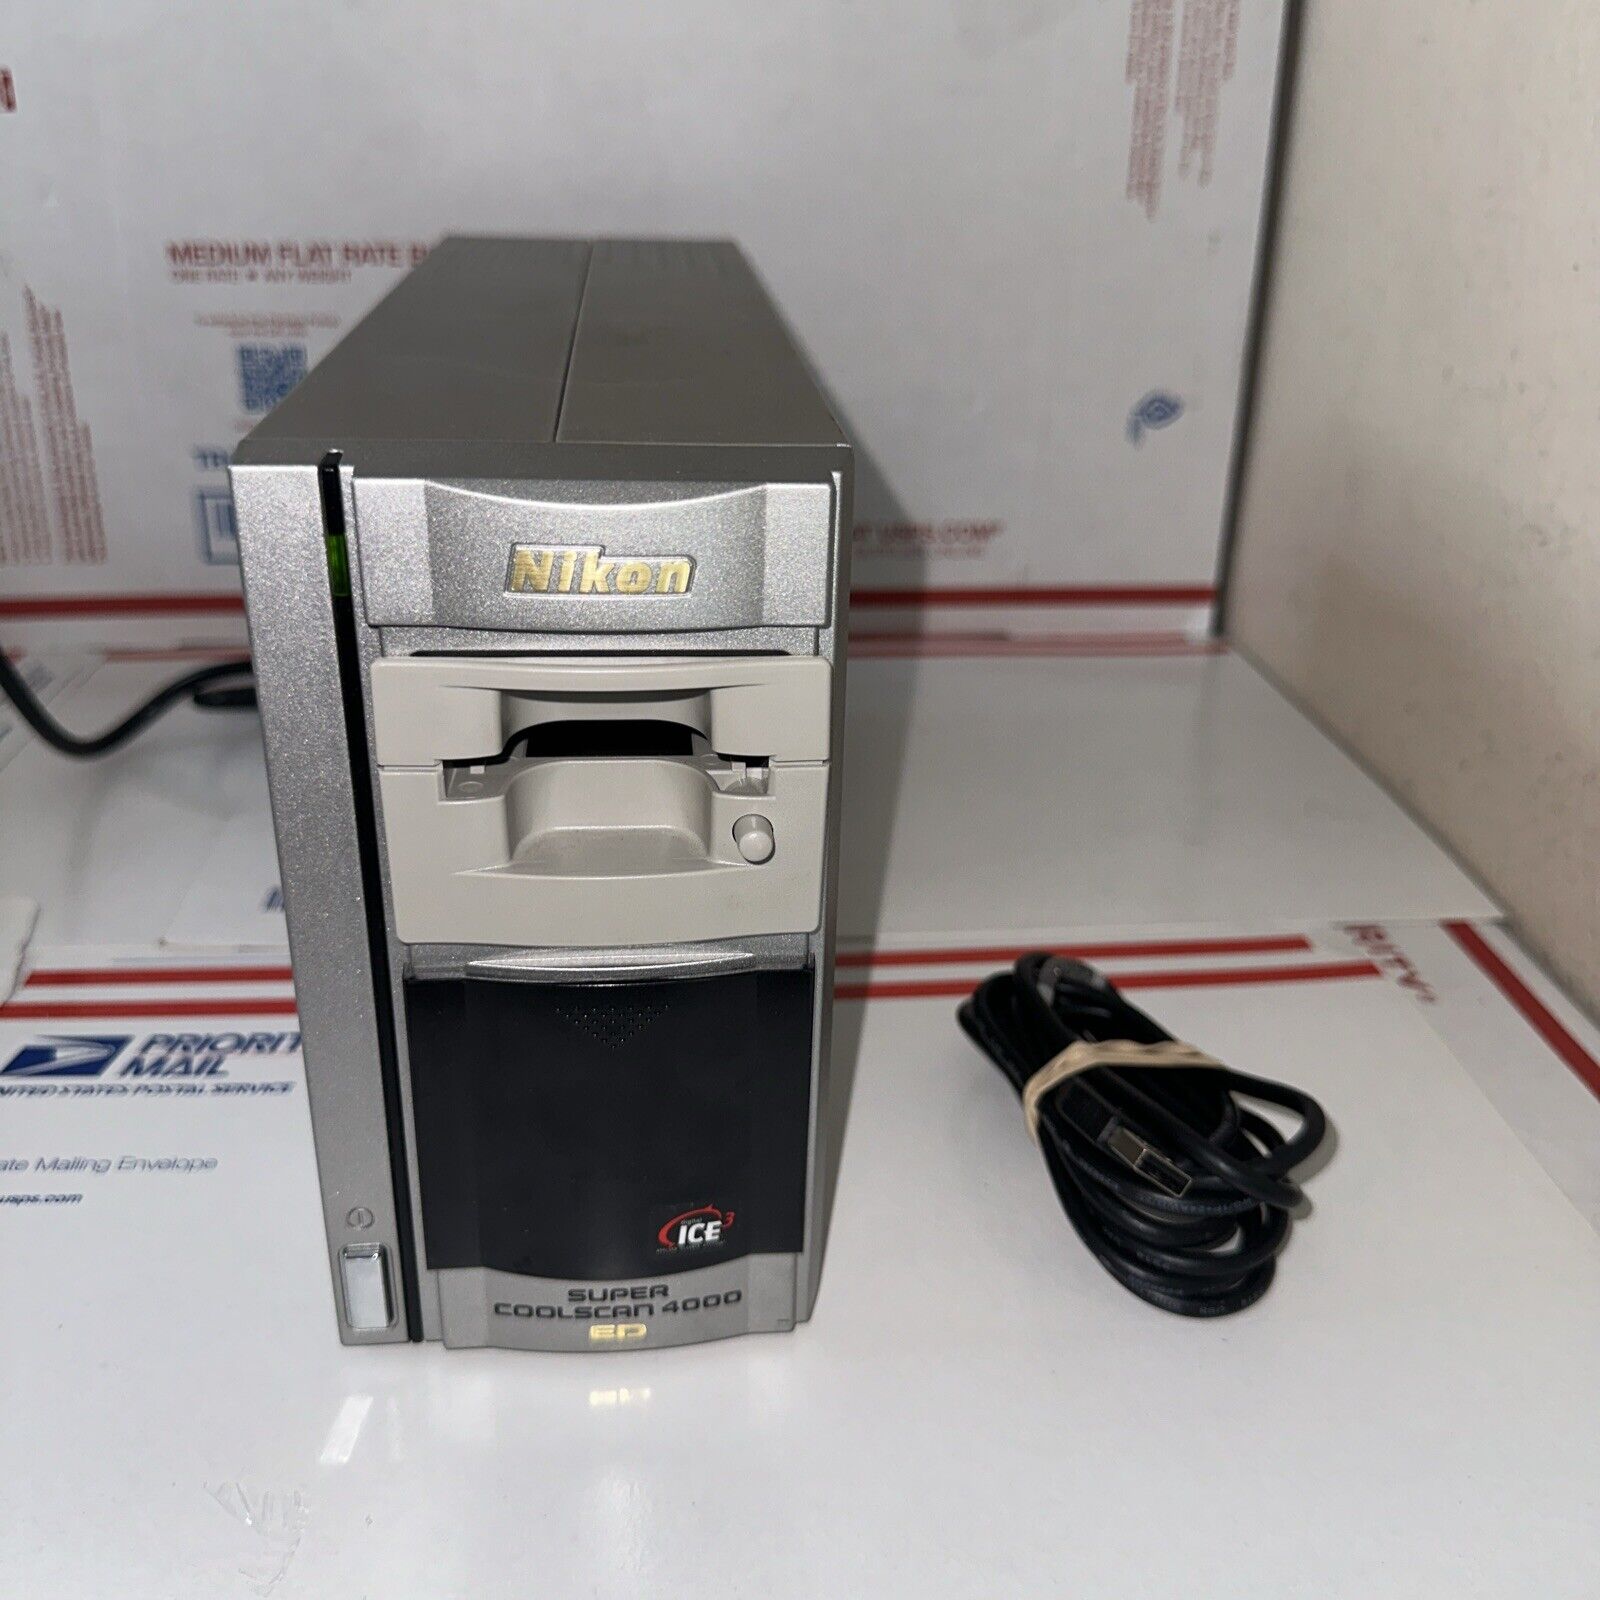 Nikon LS-4000 ED Super Coolscan 4000 Film Scanner Untested Powers On